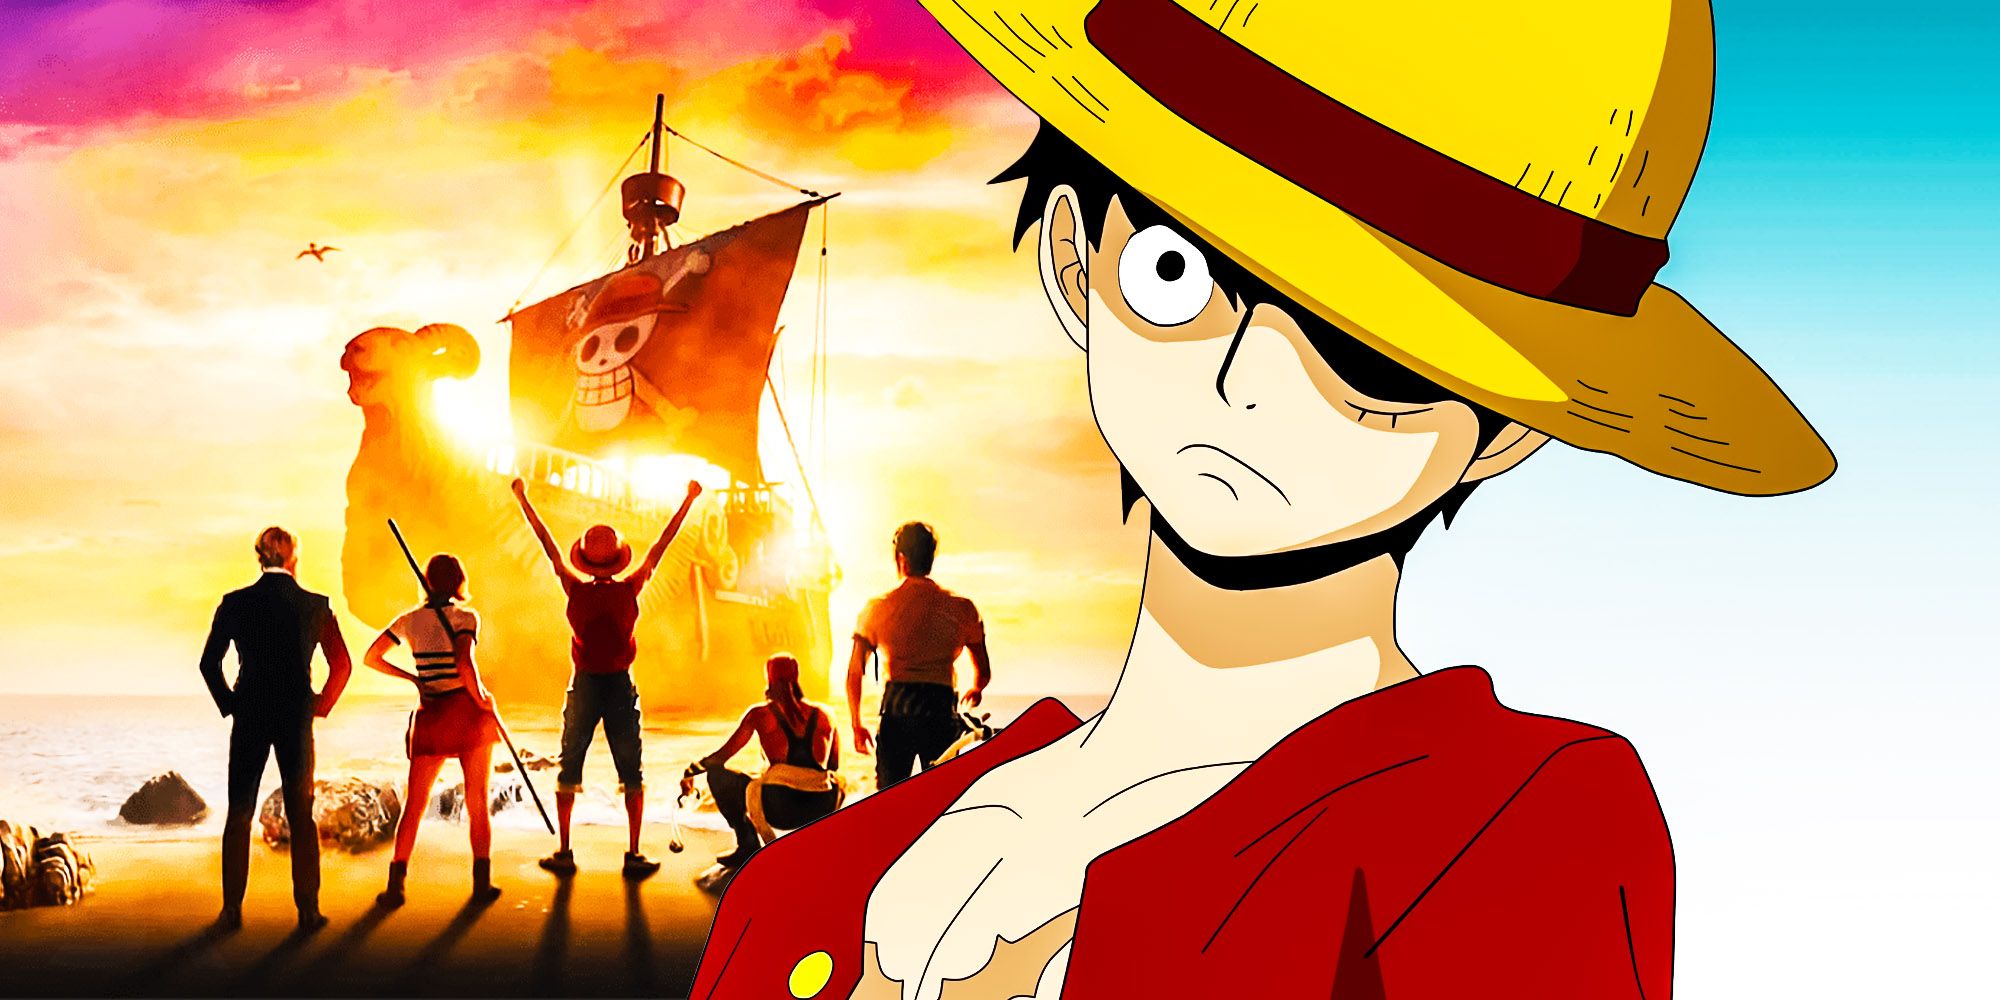 Anime Luffy overlayed over a promotional image of the Straw Hat Pirates from the One Piece live-action adaptation